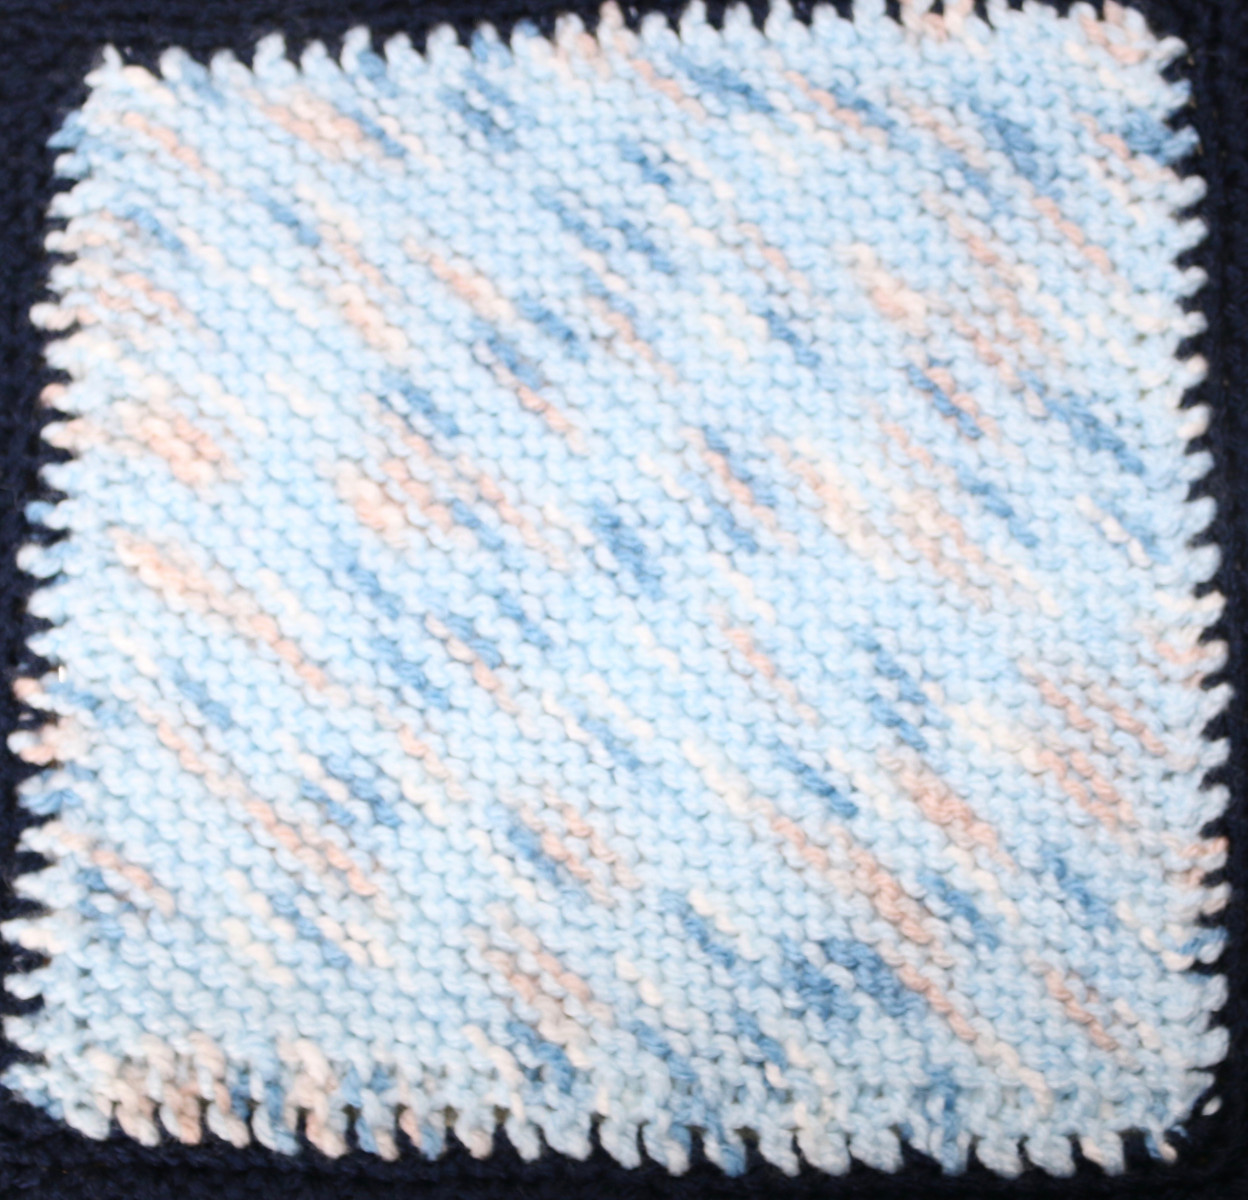 Blue, pink and white knitted square